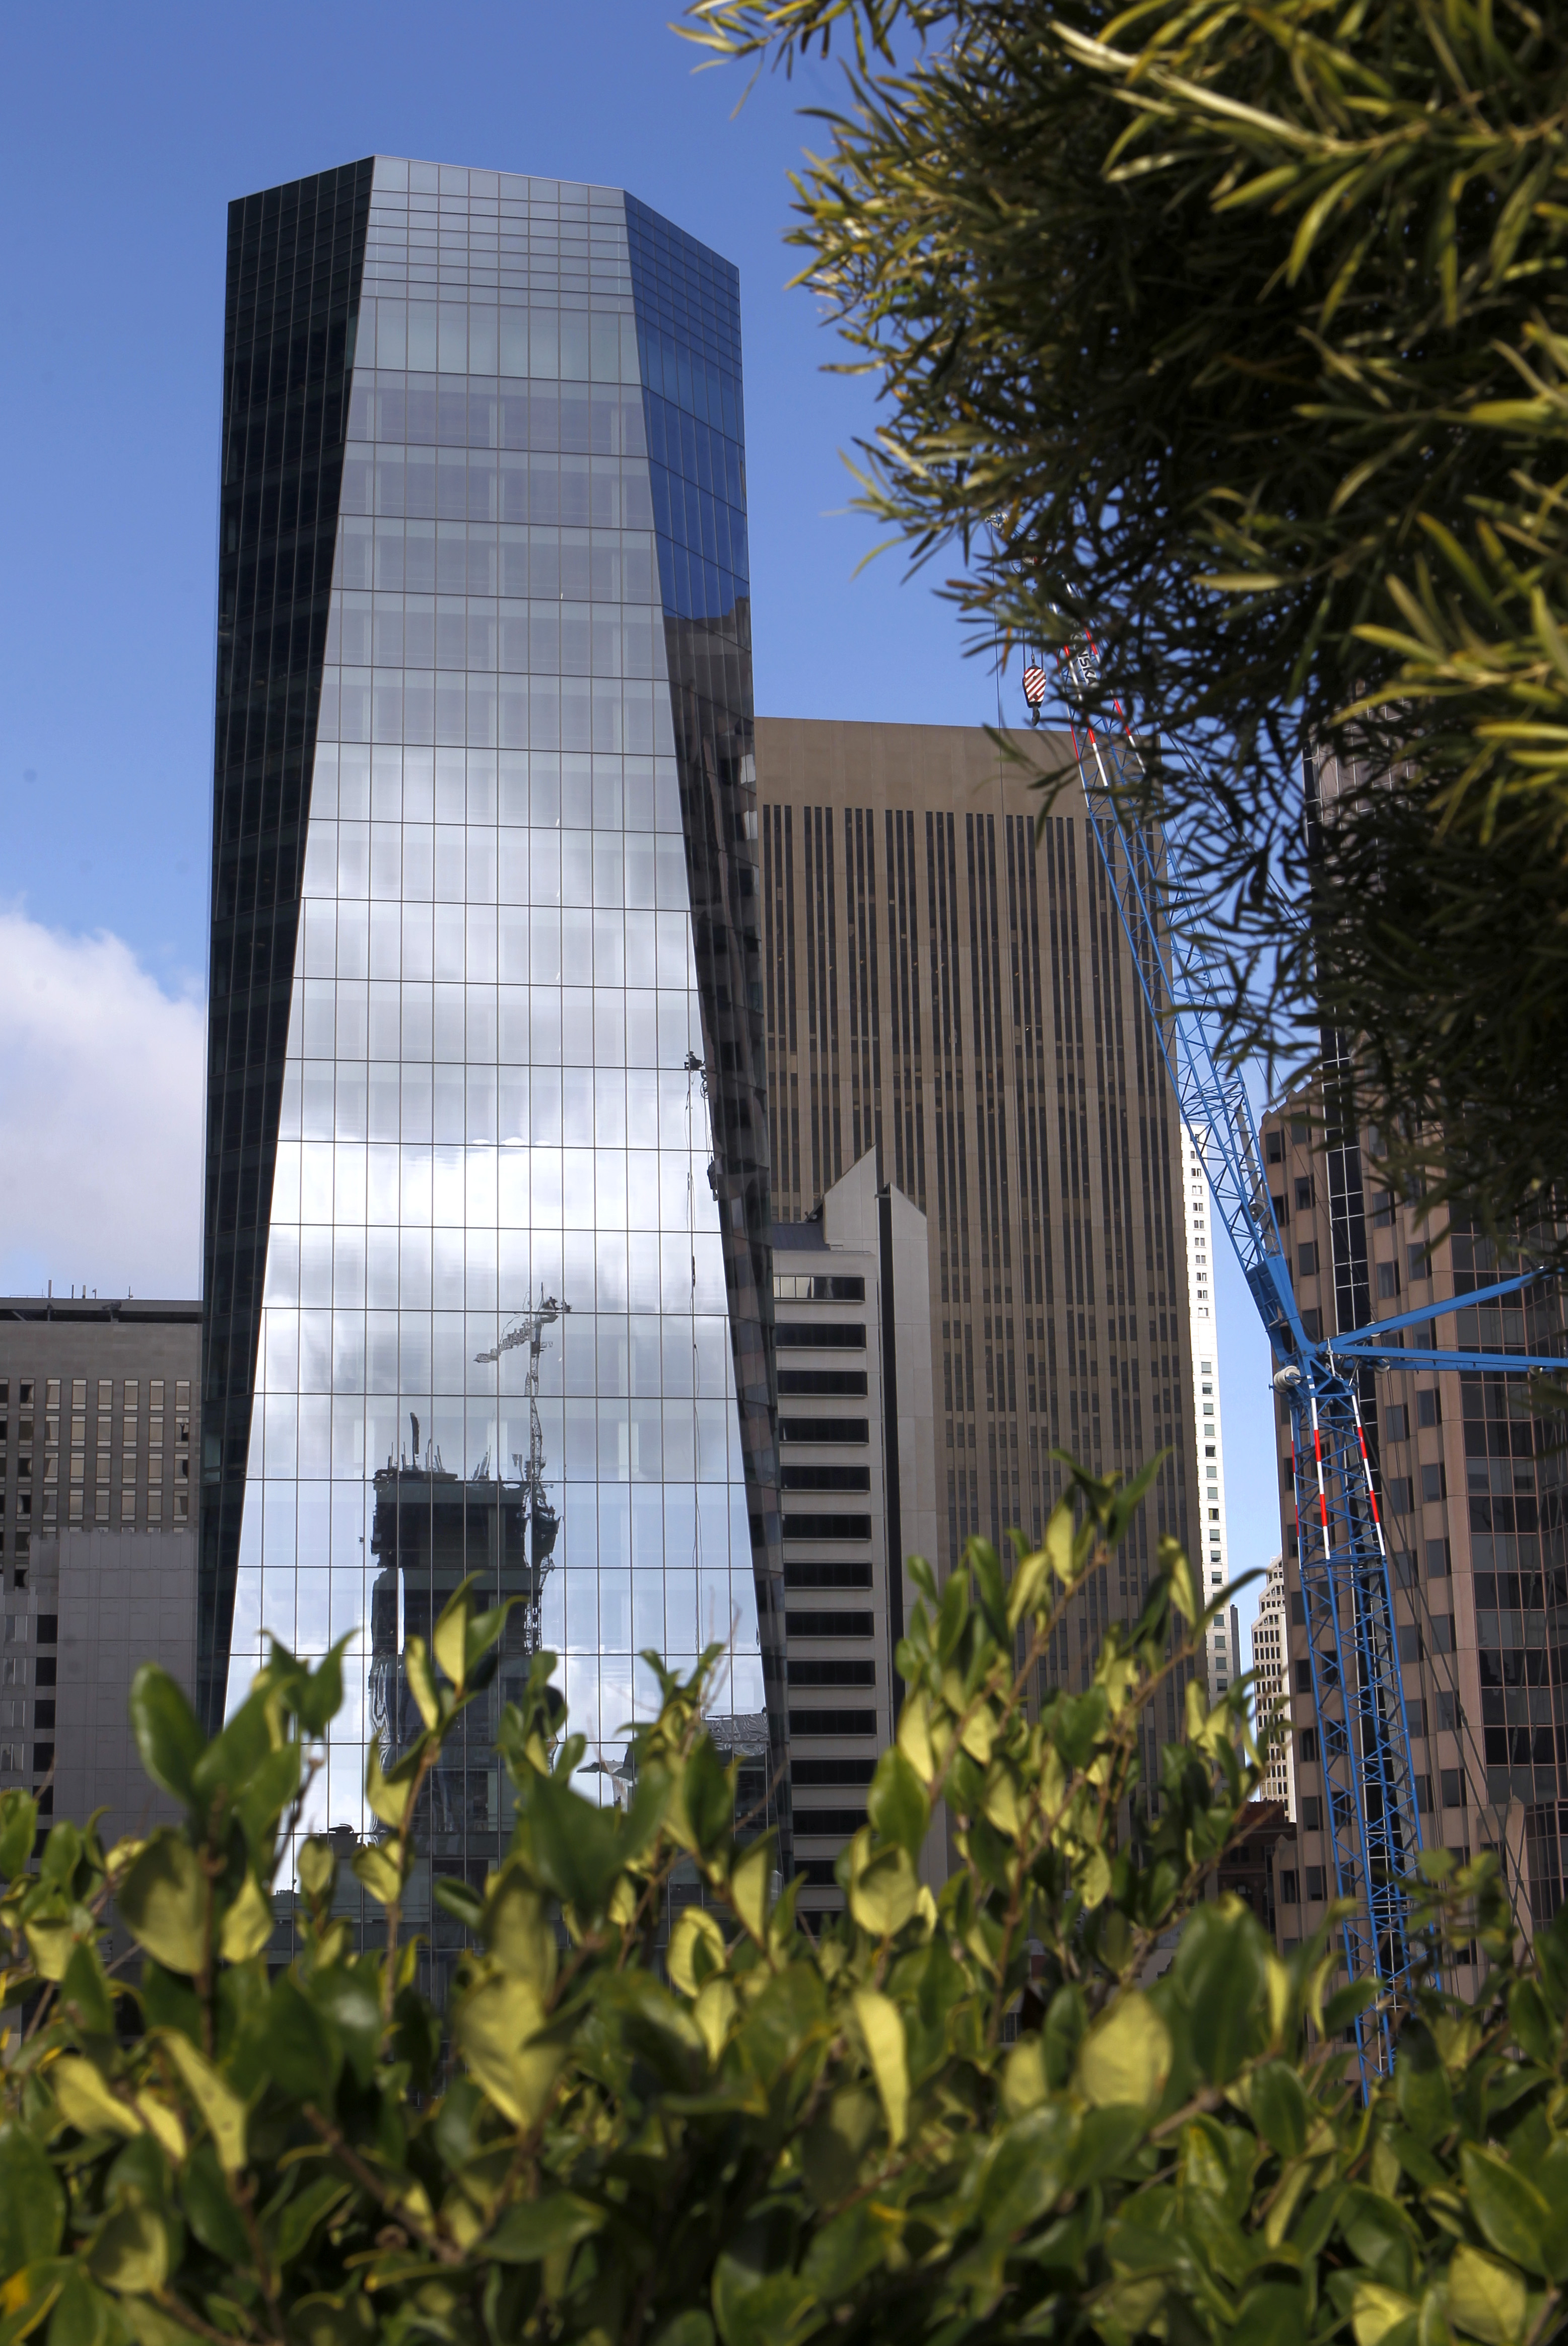 A reflective skyscraper towers over other buildings, with foliage in the foreground and a crane visible in the reflection.